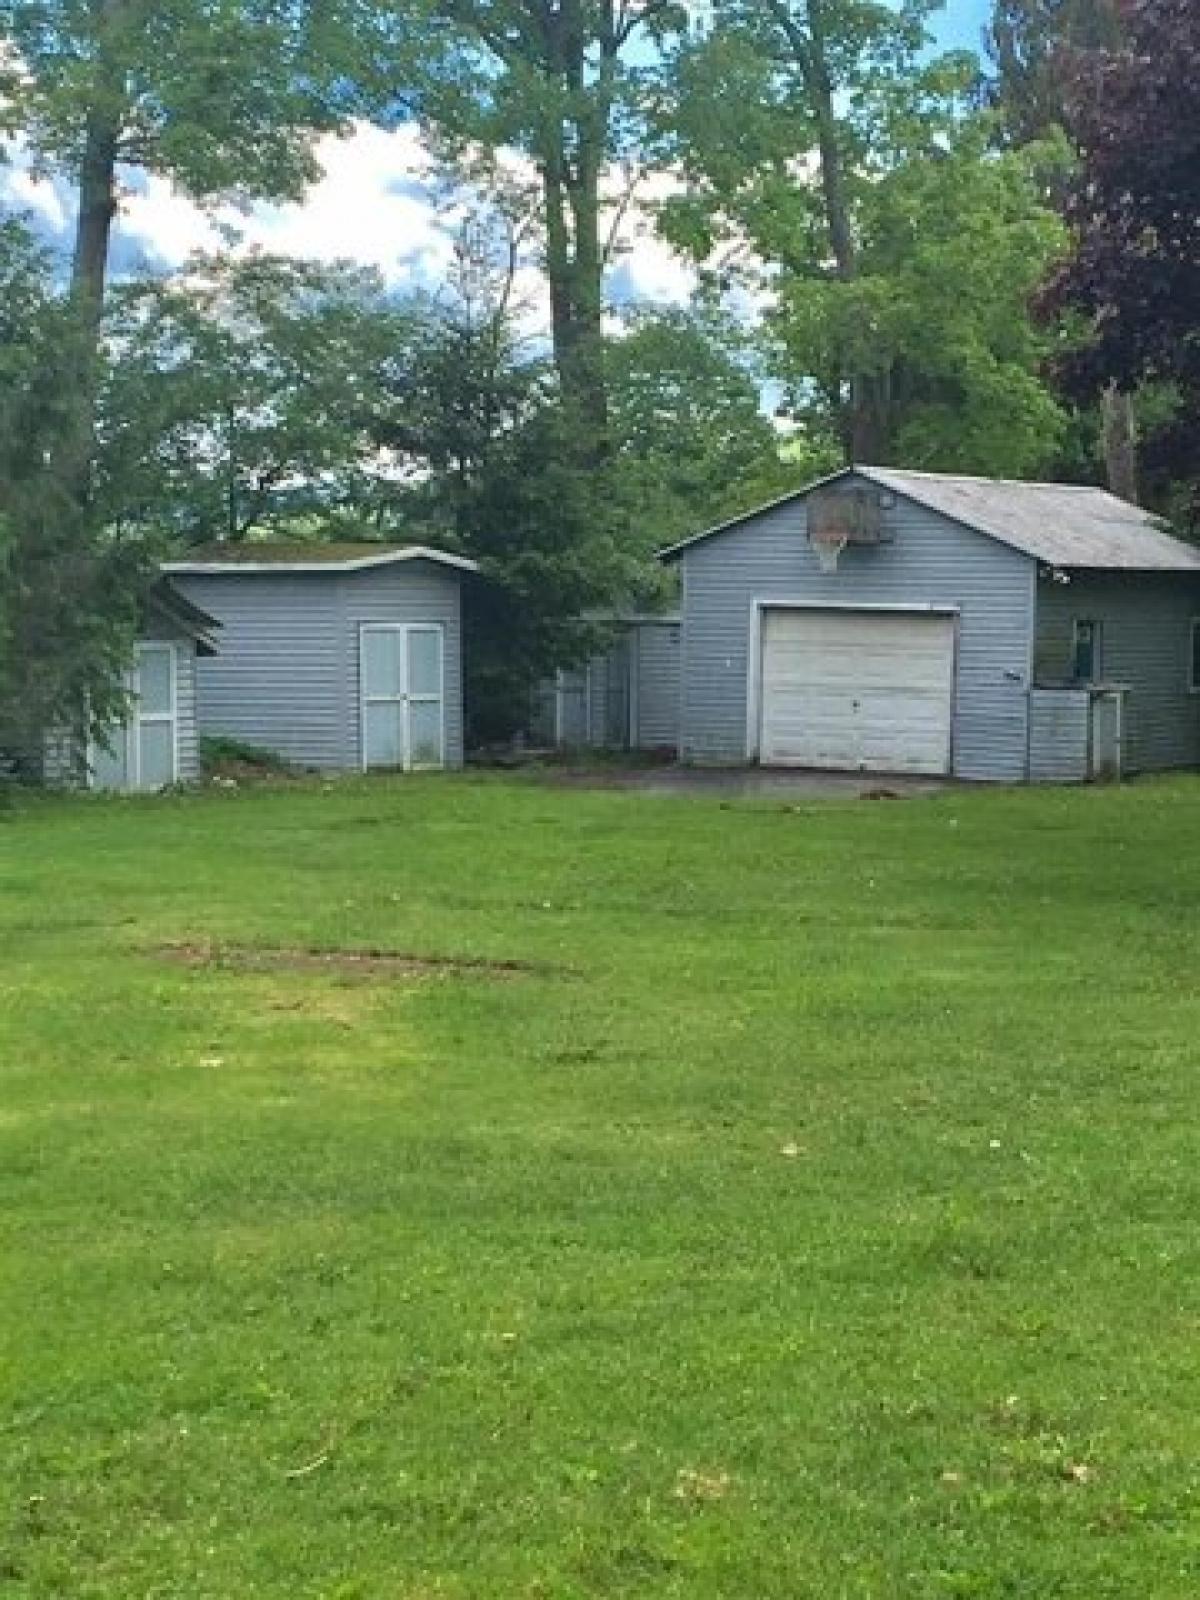 Picture of Home For Sale in Garrattsville, New York, United States